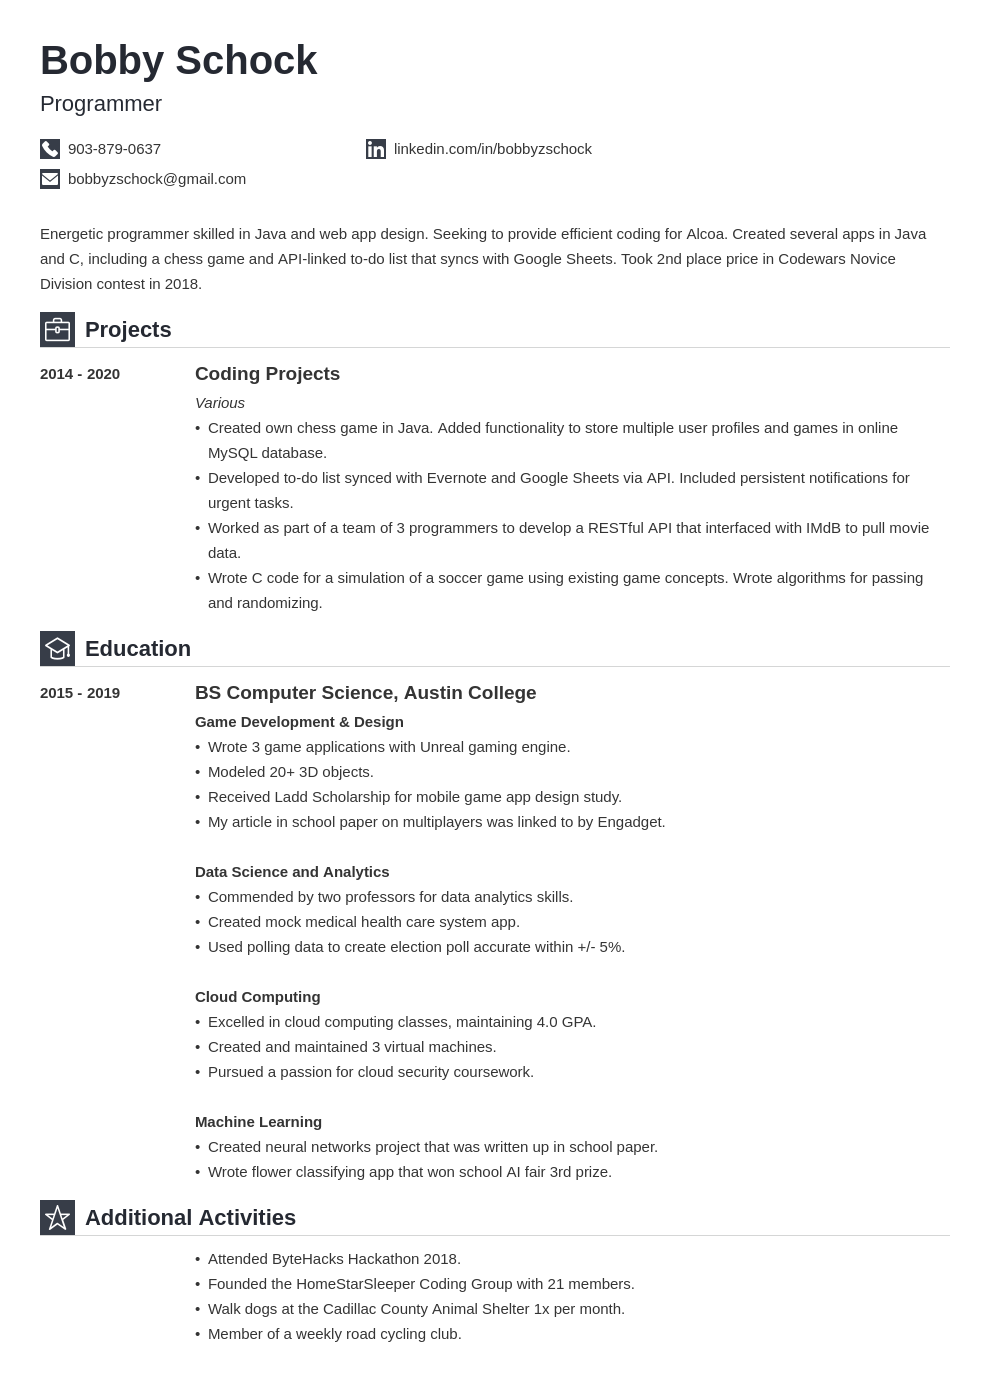 How to Make a Resume for a First Job  No Experience [Samples]